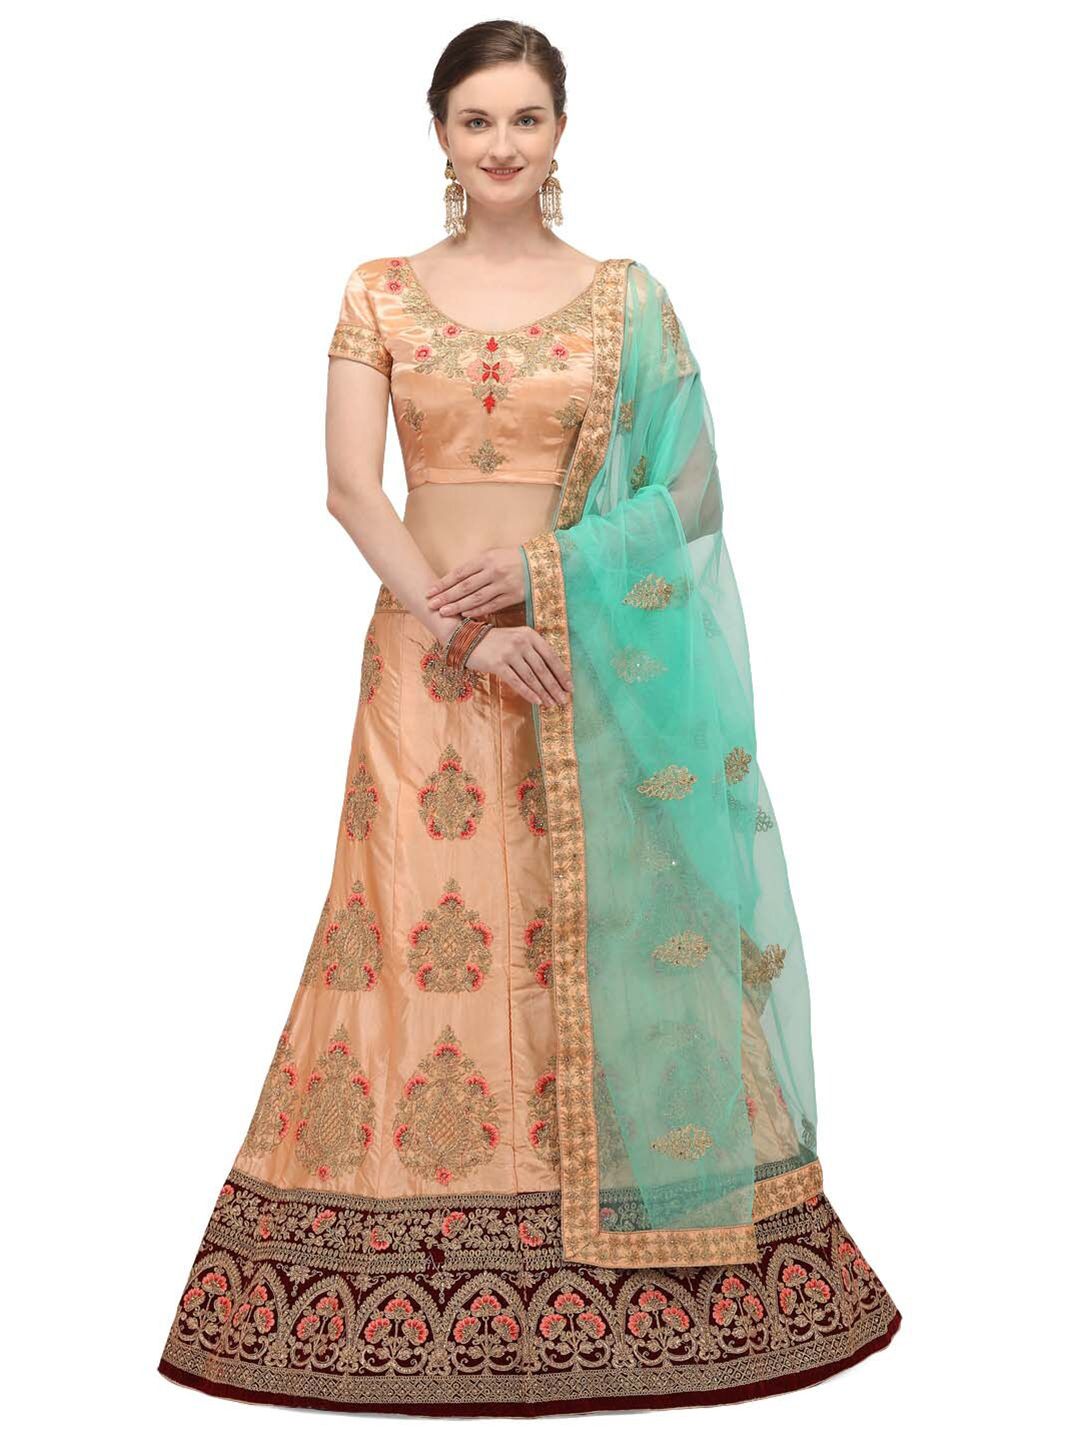 Netram Peach-Coloured & Green Embroidered Semi-Stitched Lehenga & Unstitched Blouse With Dupatta Price in India